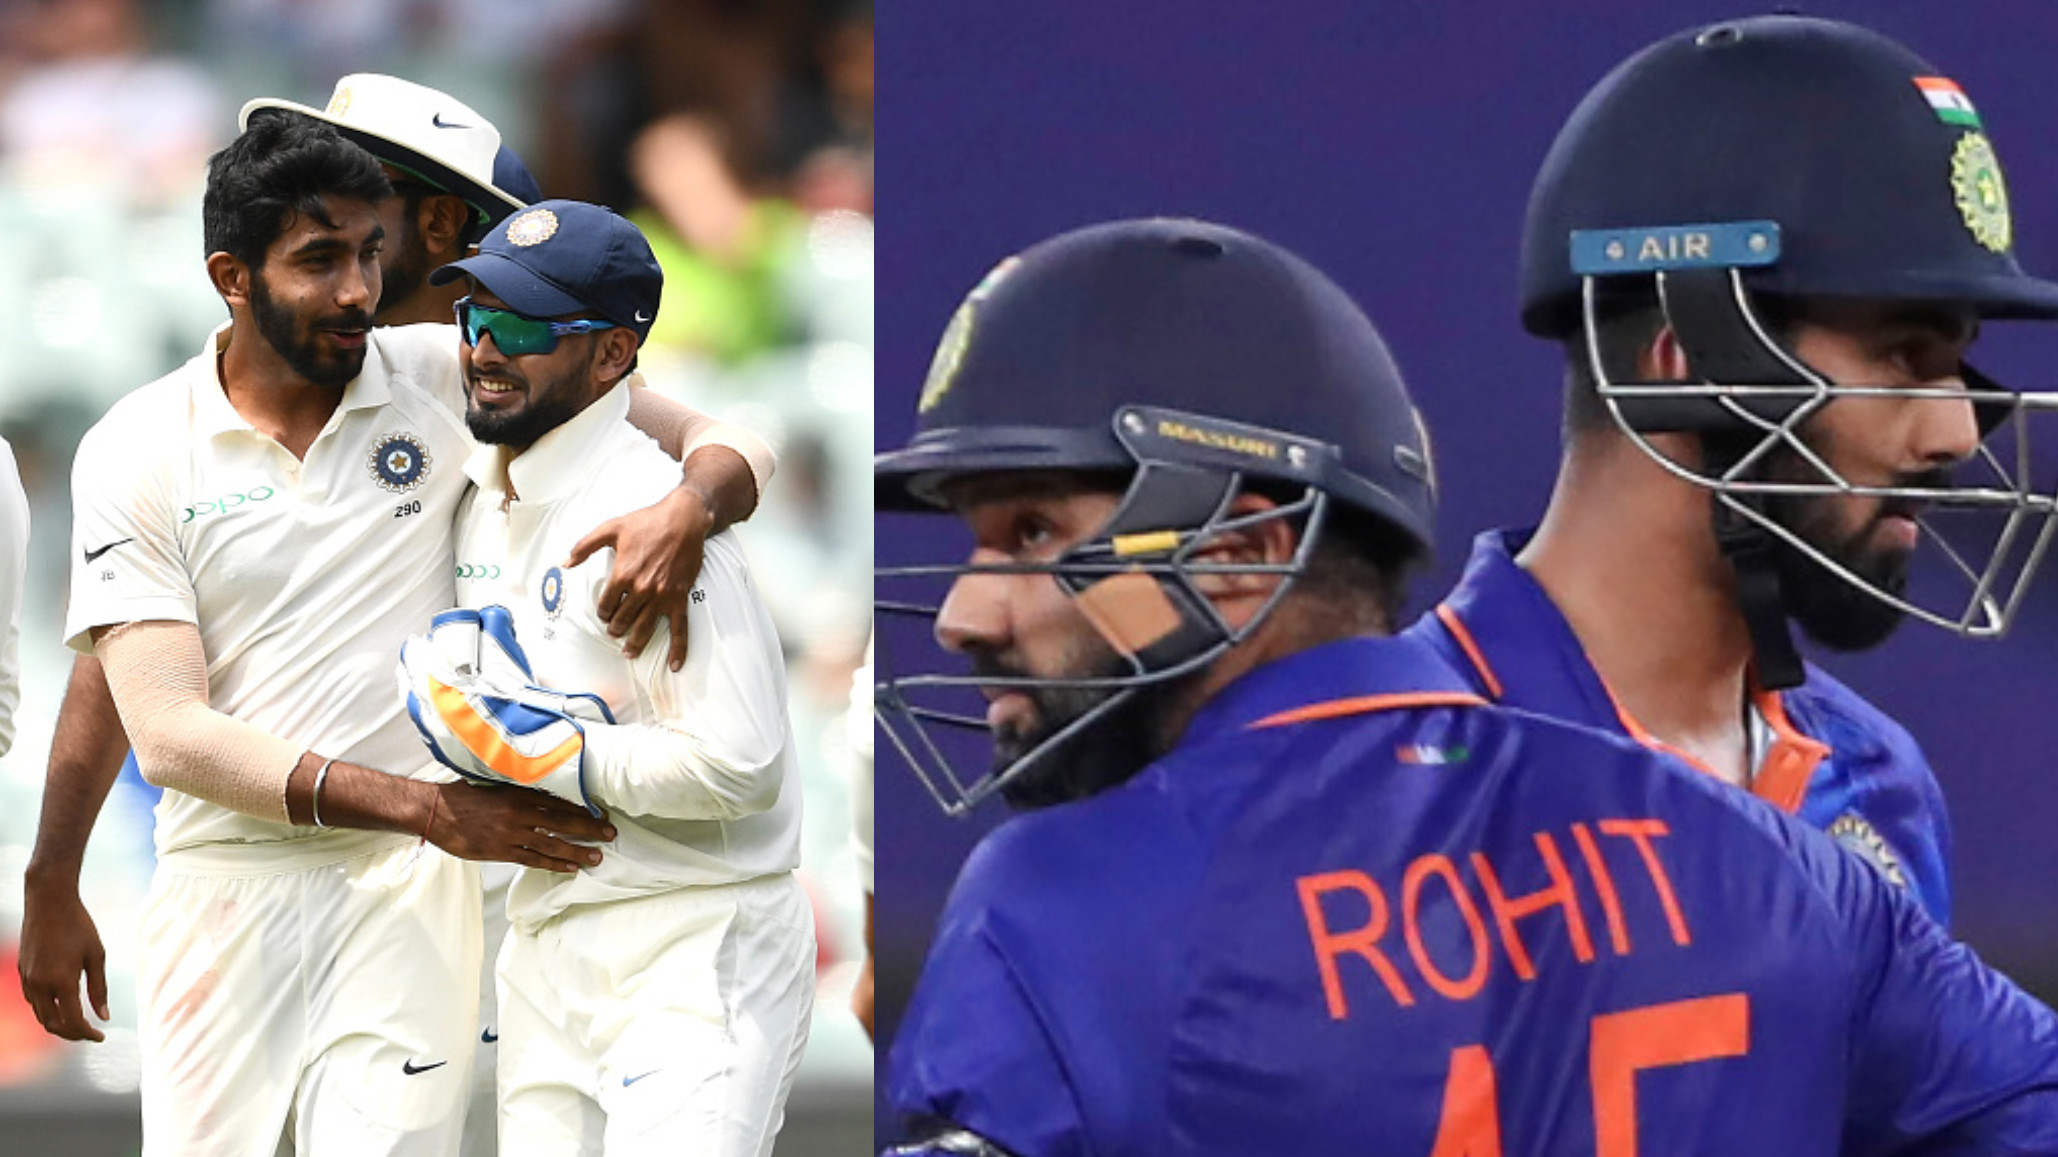 IND v SL 2022: KL Rahul, Rishabh Pant and Jasprit Bumrah looked upon as leaders in the group: Rohit Sharma